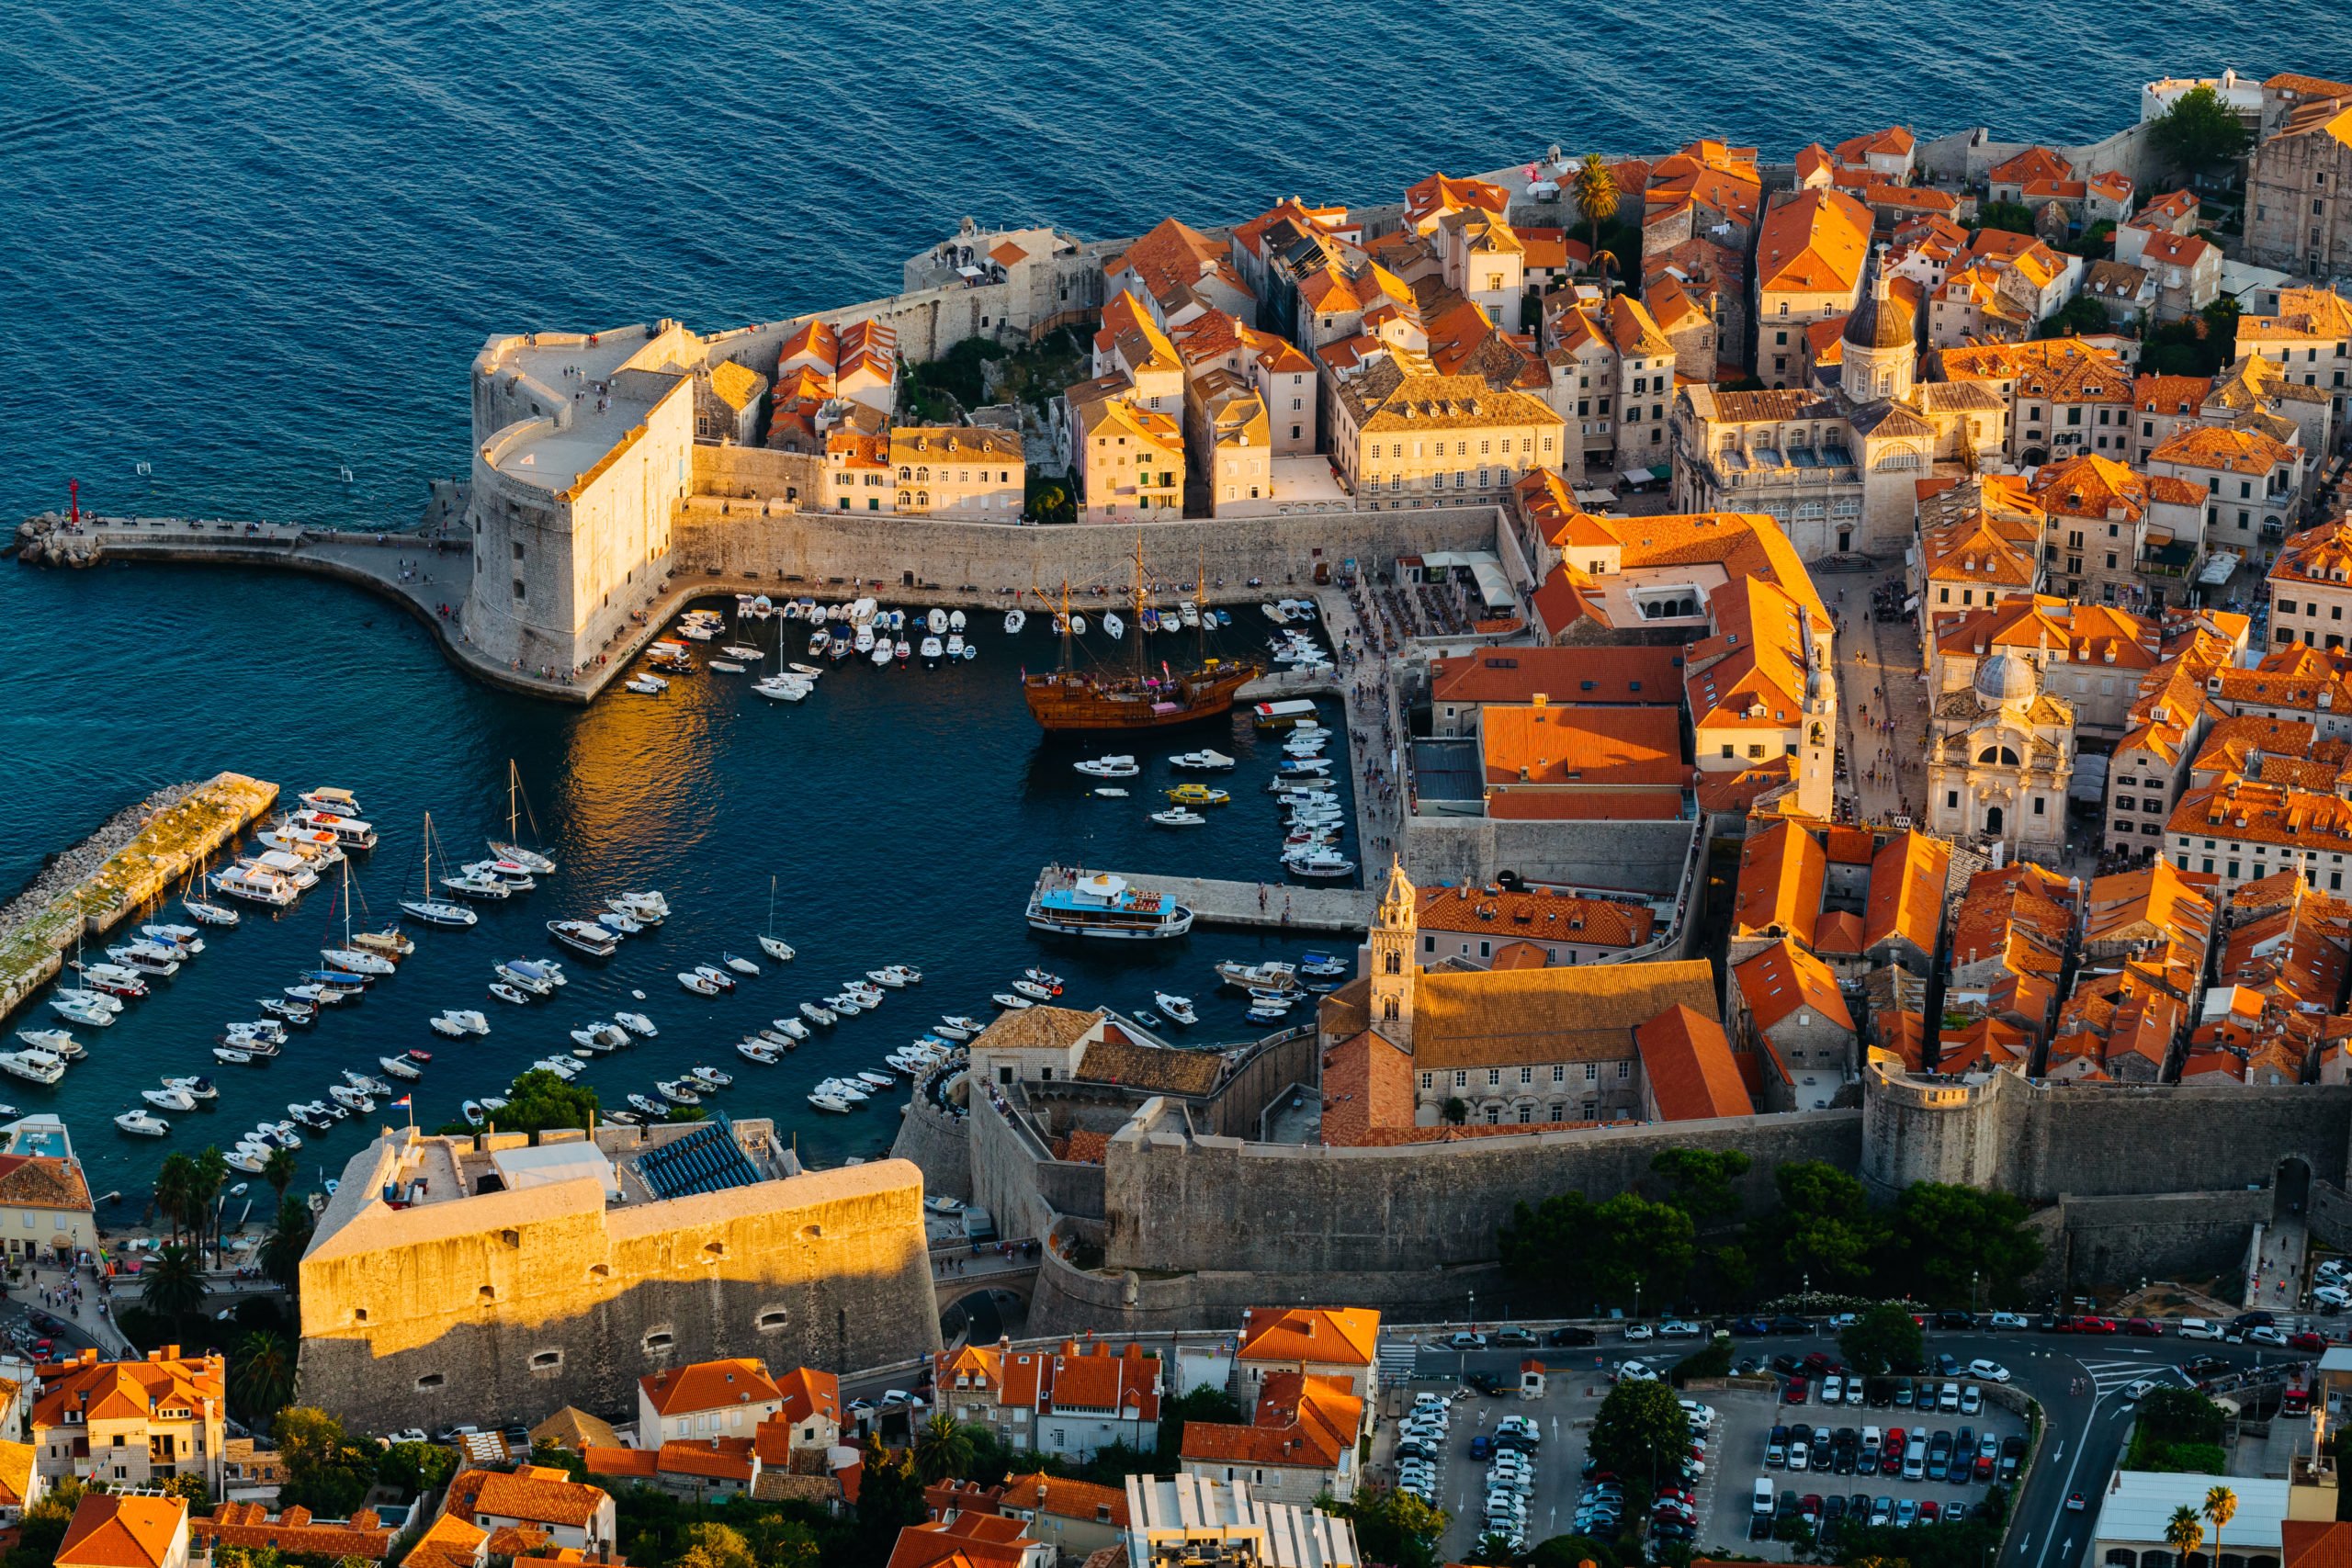 Enjoy The Views From Mt Srdj On Your Best Of Dubrovnik Shore Excursion